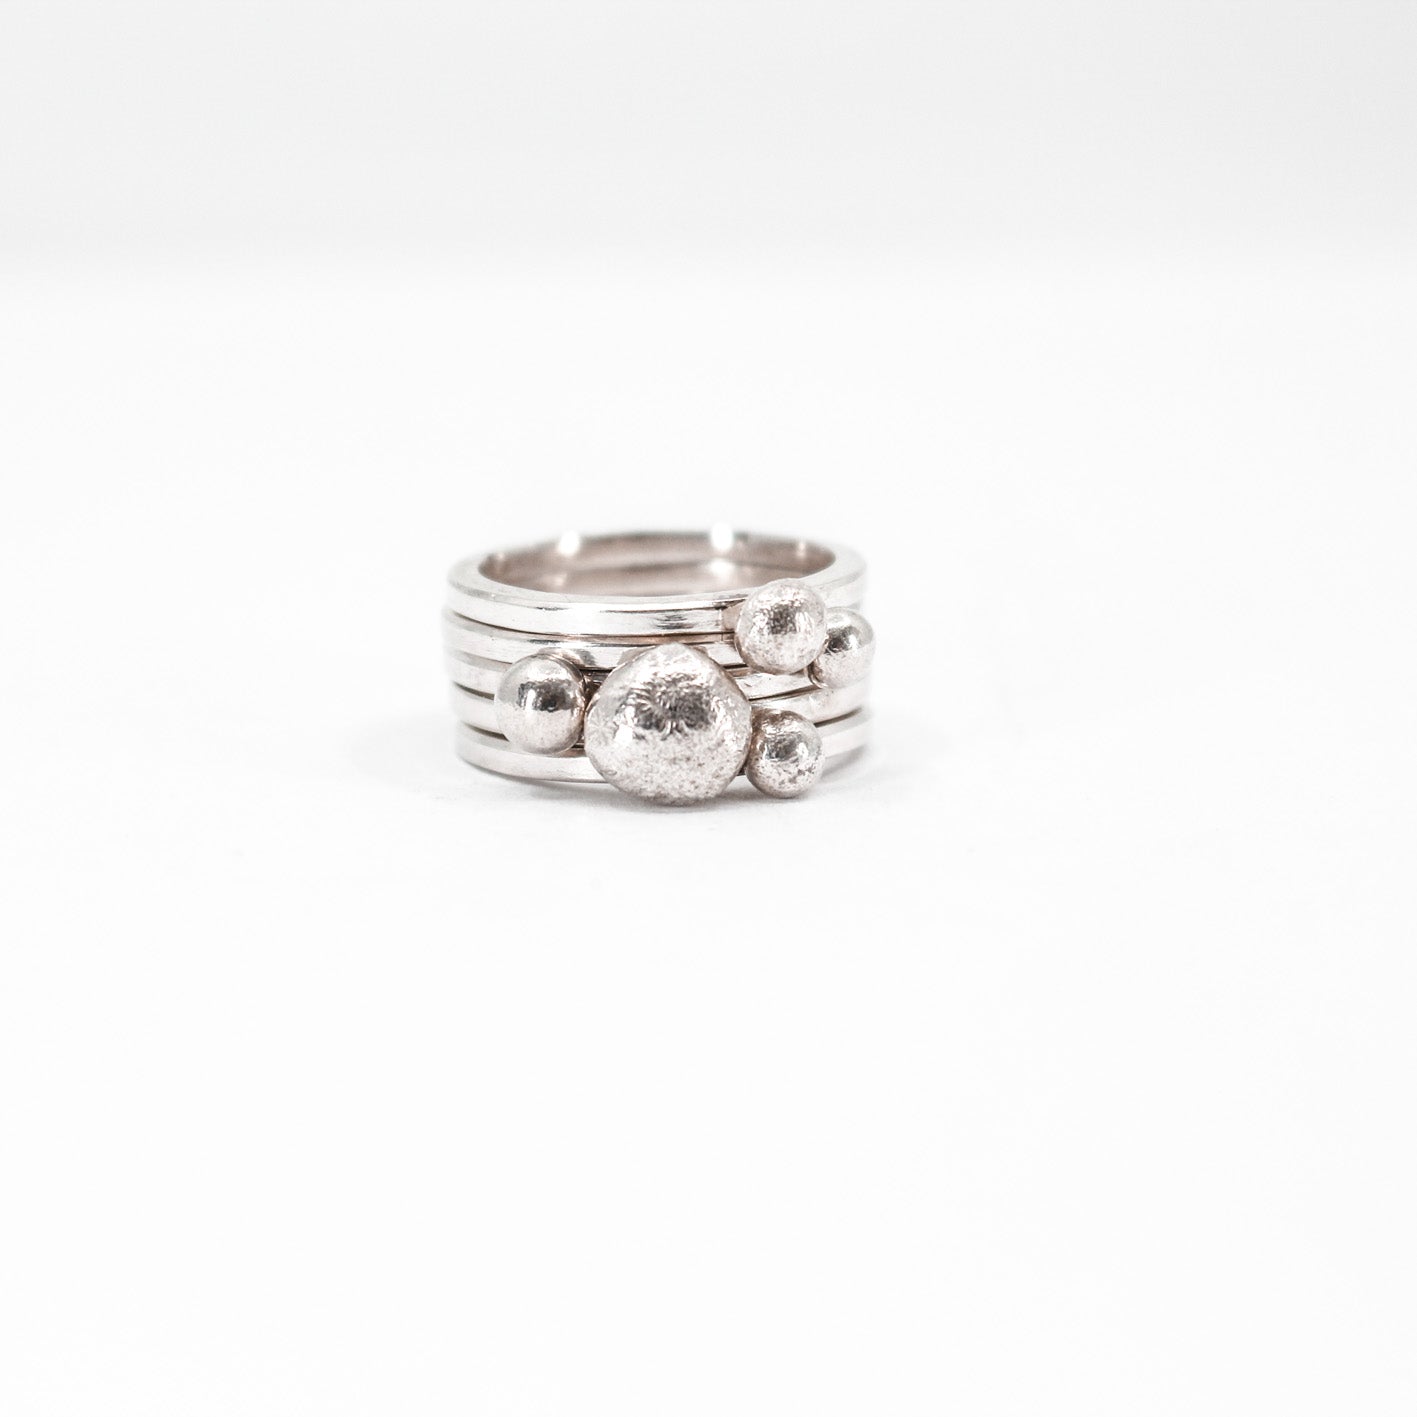 five simple silver stacking rings each with a textured sterling silver drop, sabine Werner jewellery 